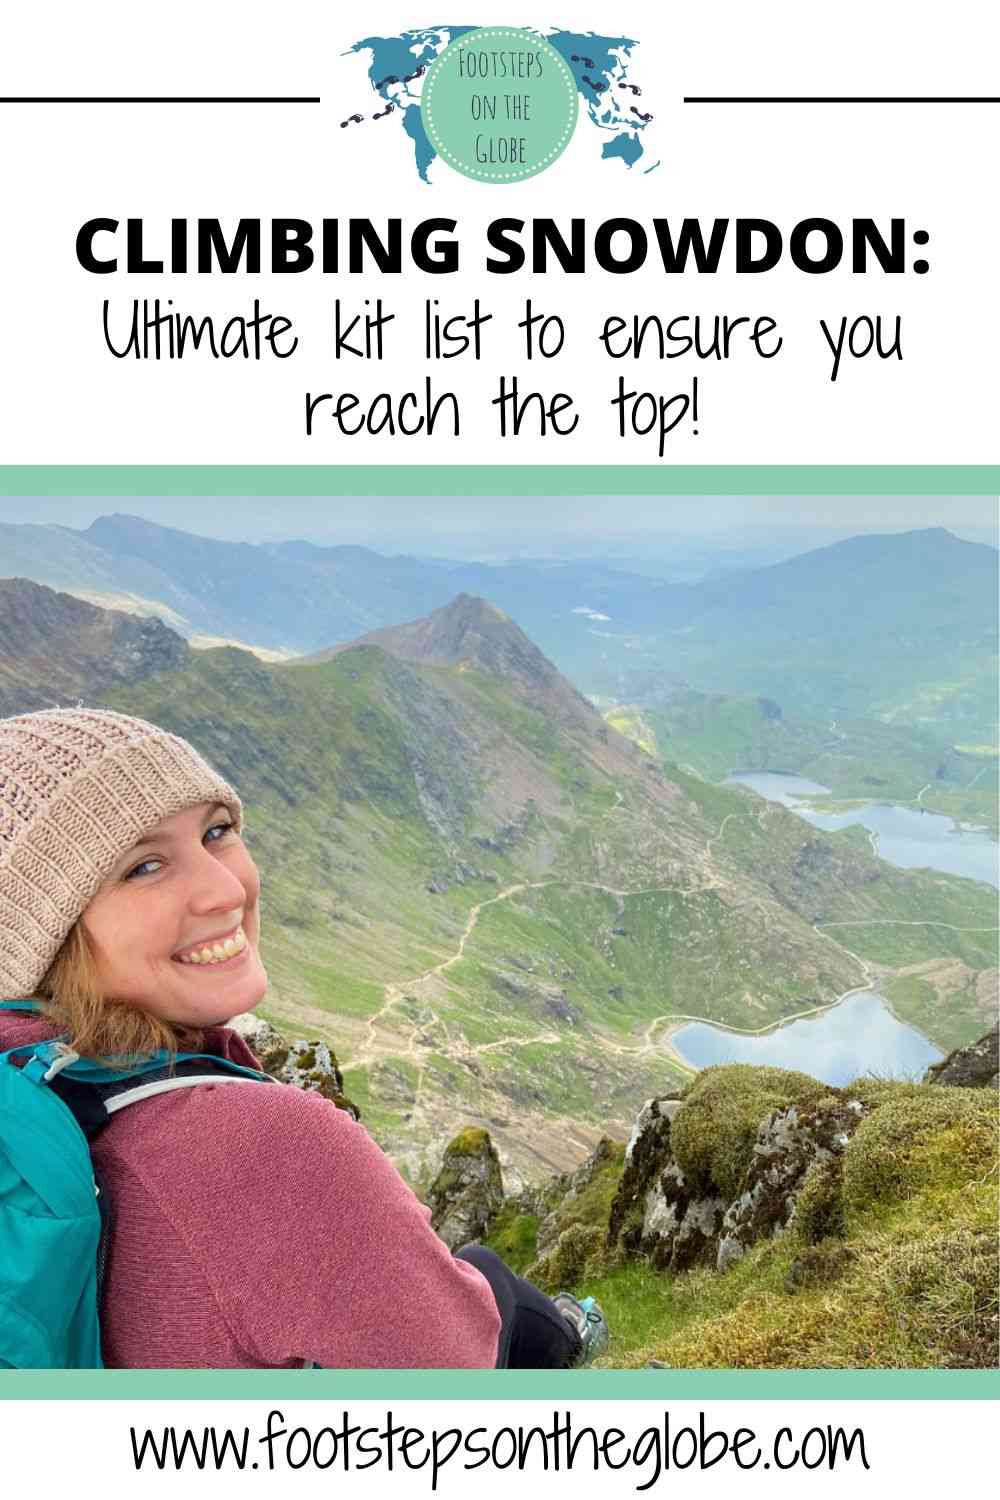 Mel smiling at the top of Snowdon with mountains and lakes in the background with the text: "CLIMBING SNOWDON: Ultimate kit list to ensure you reach the top" Pinterest image